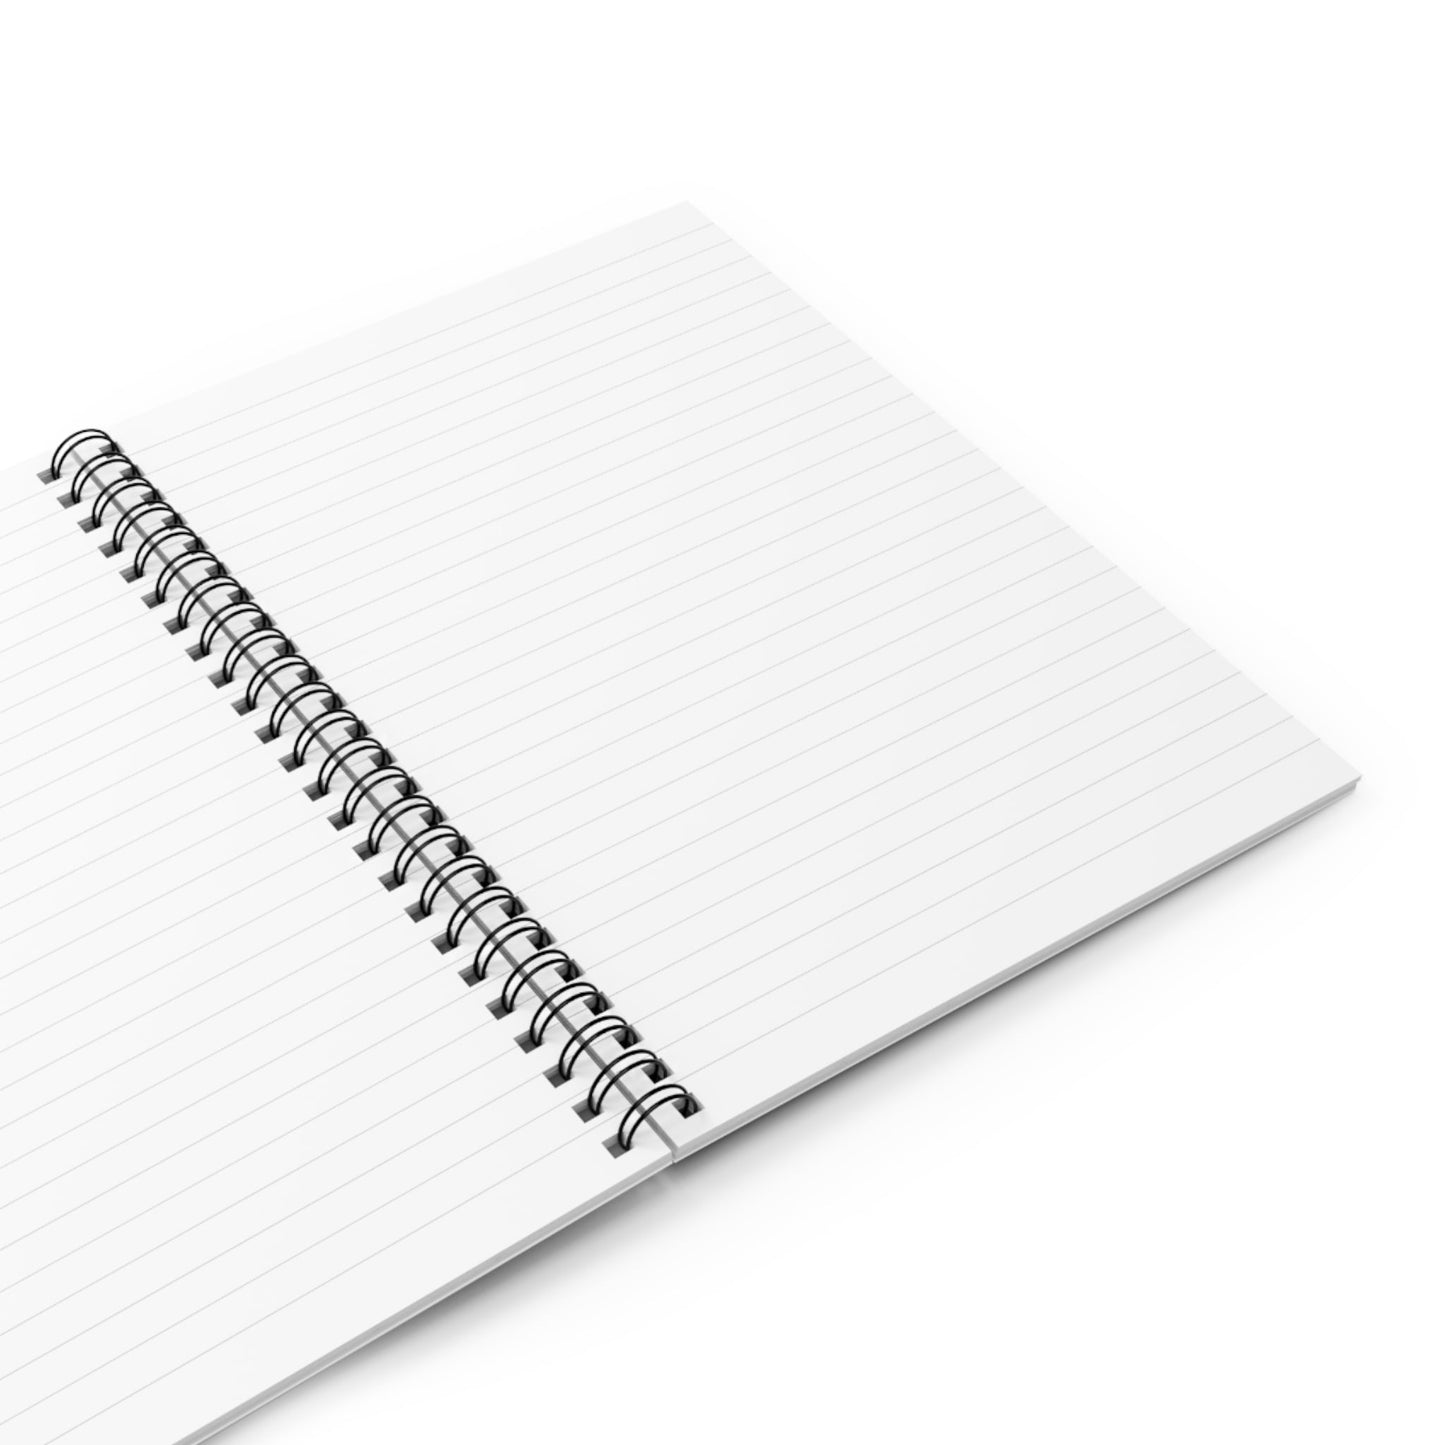 Spiral Notebook with Tranquil Landscape Cover Opened with Blank White College Ruled Pages